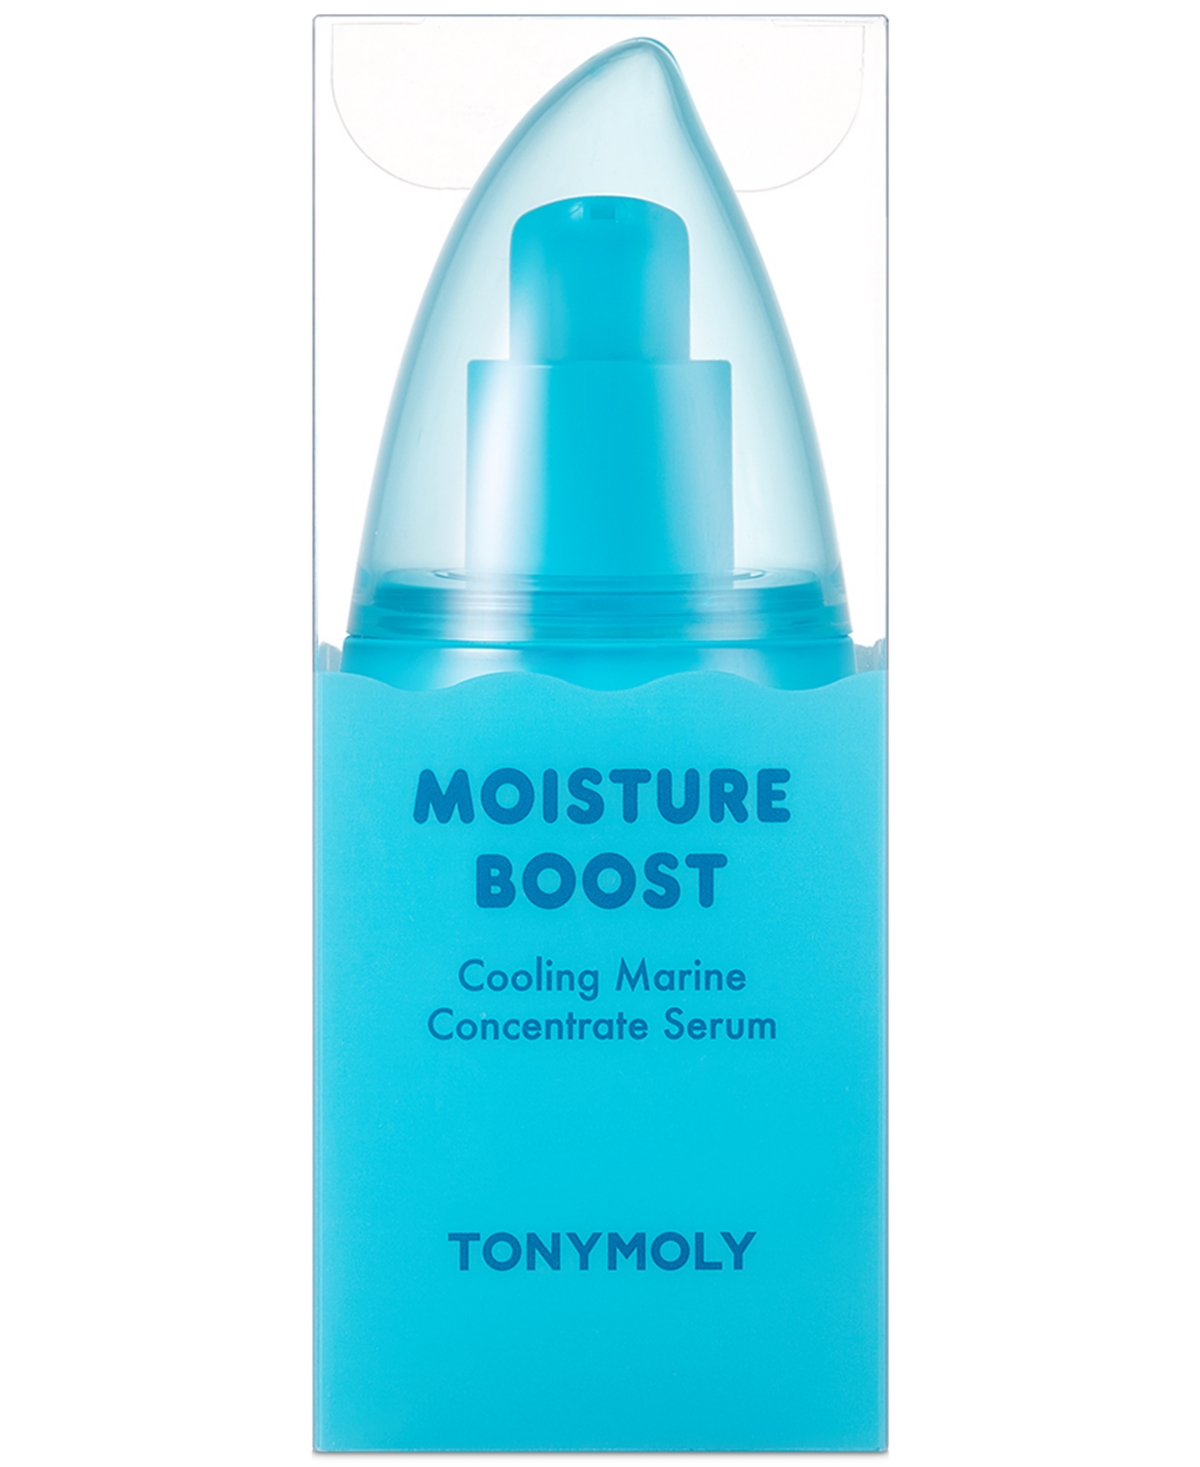 Moisture Boost Cooling Marine Concentrate Serum